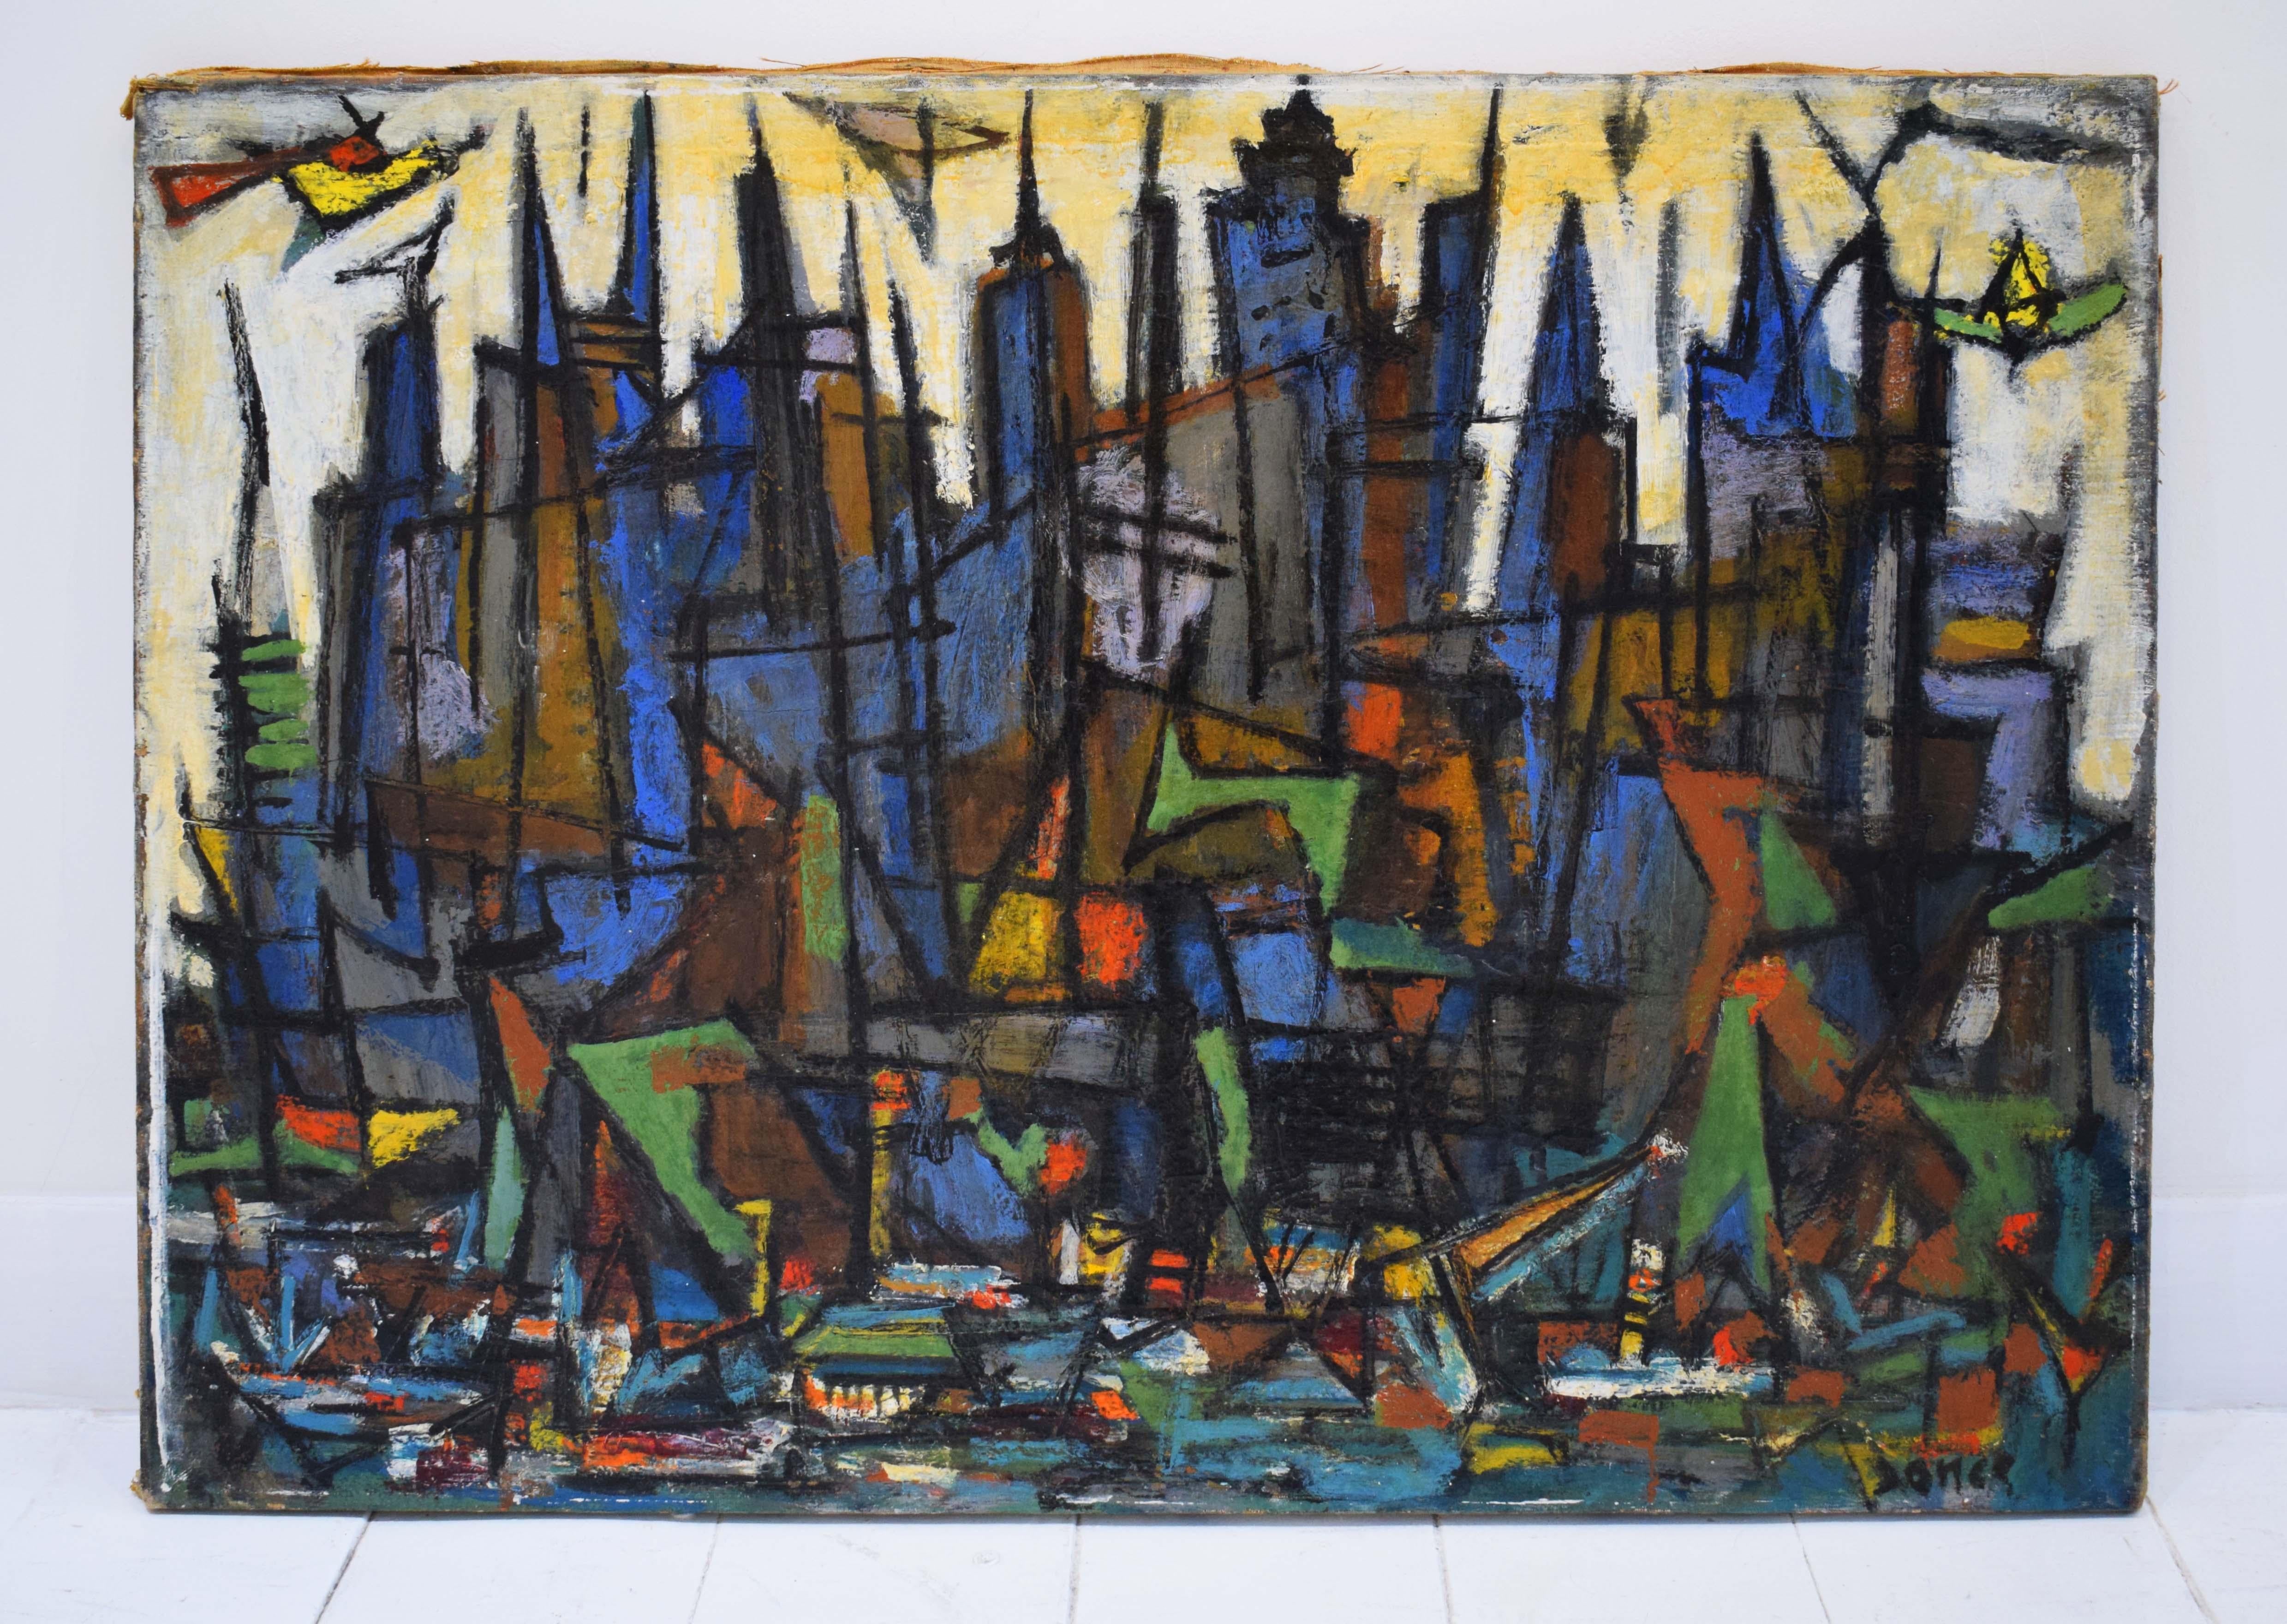 Harbour View - Cityscape Abstract Dada Romanian Israeli - Painting by Marcel Janco